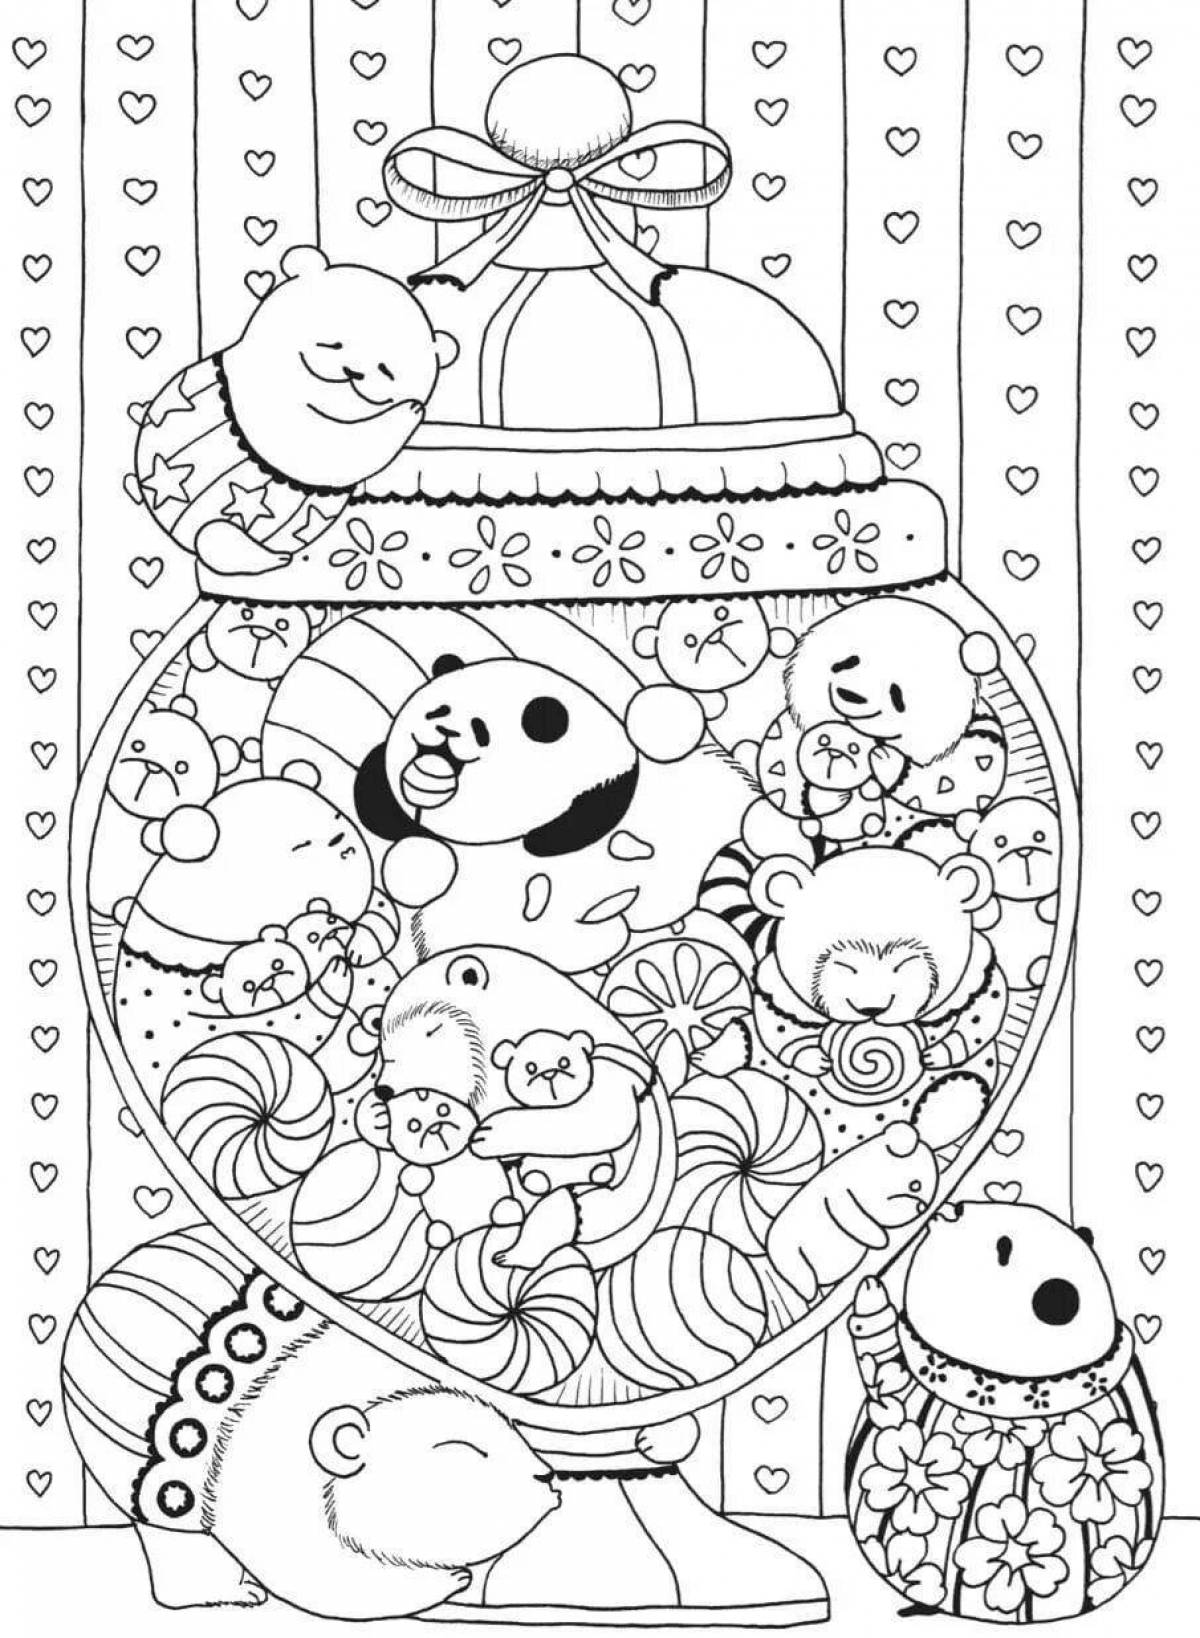 Coloring book fluffy million bears